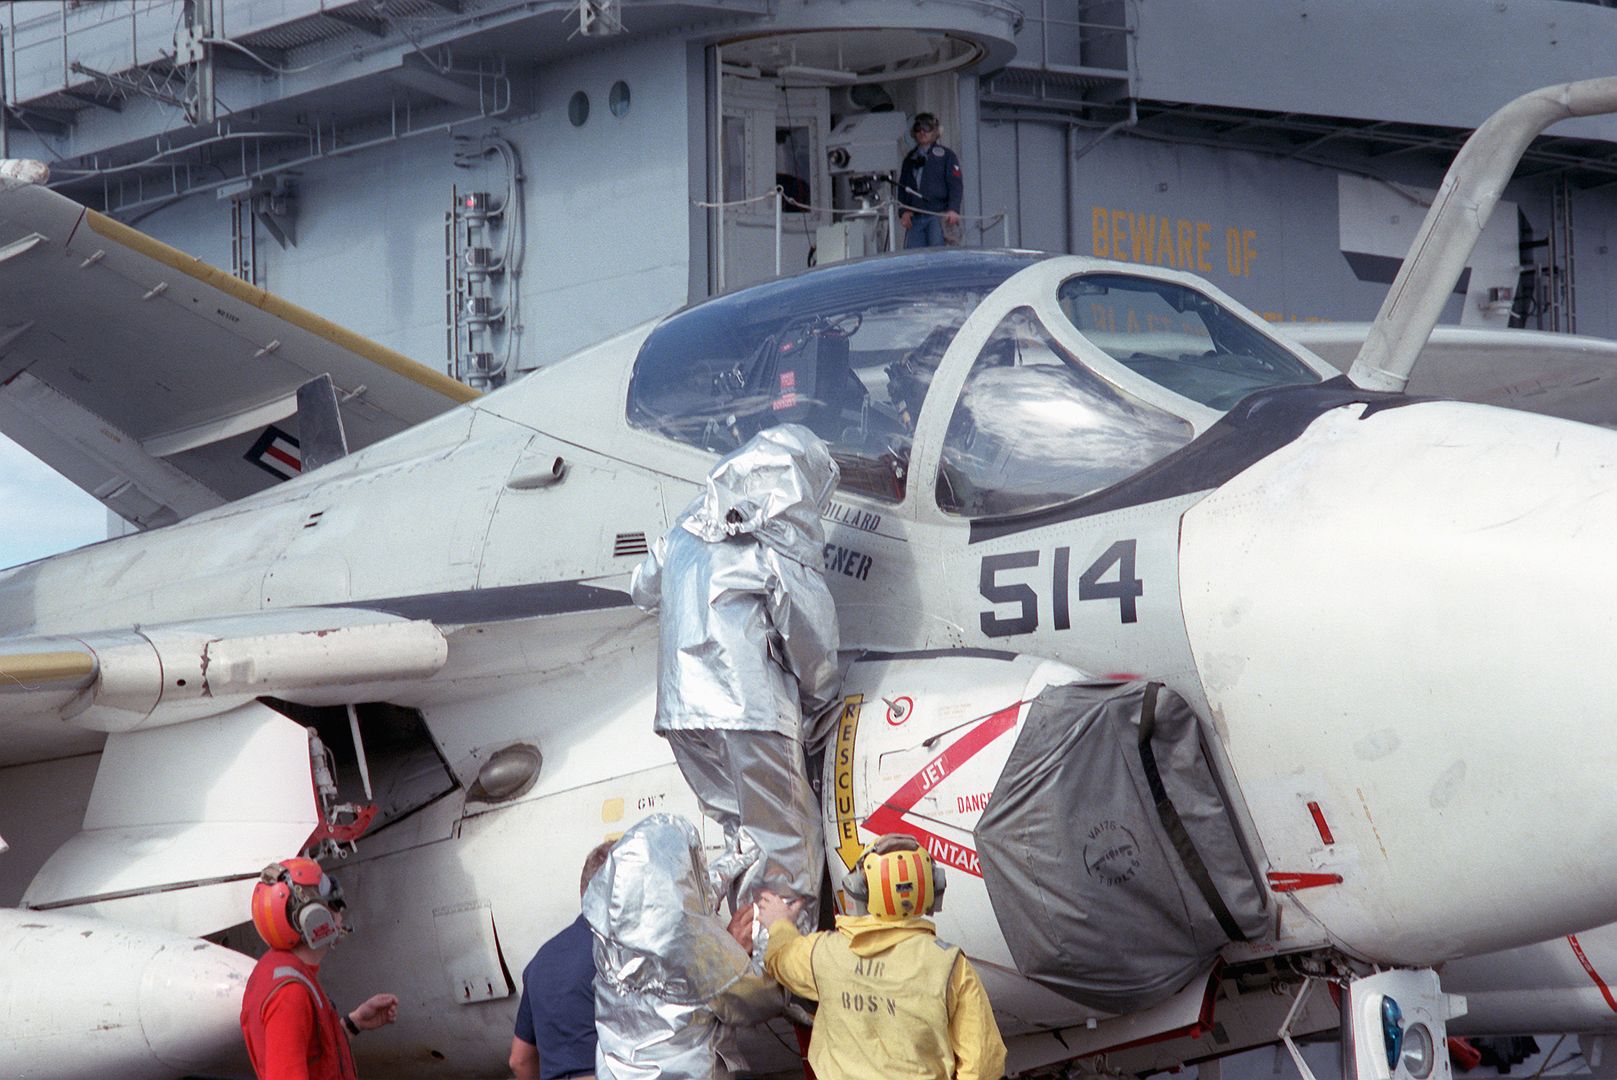 A Firefighter Wearing A Proximity Suit Climbs Onto An A 6E Intruder Aircraft During A General Quarters Drill Aboard The Nuclear Powered Aircraft Carrier USS THEODORE ROOSEVELT